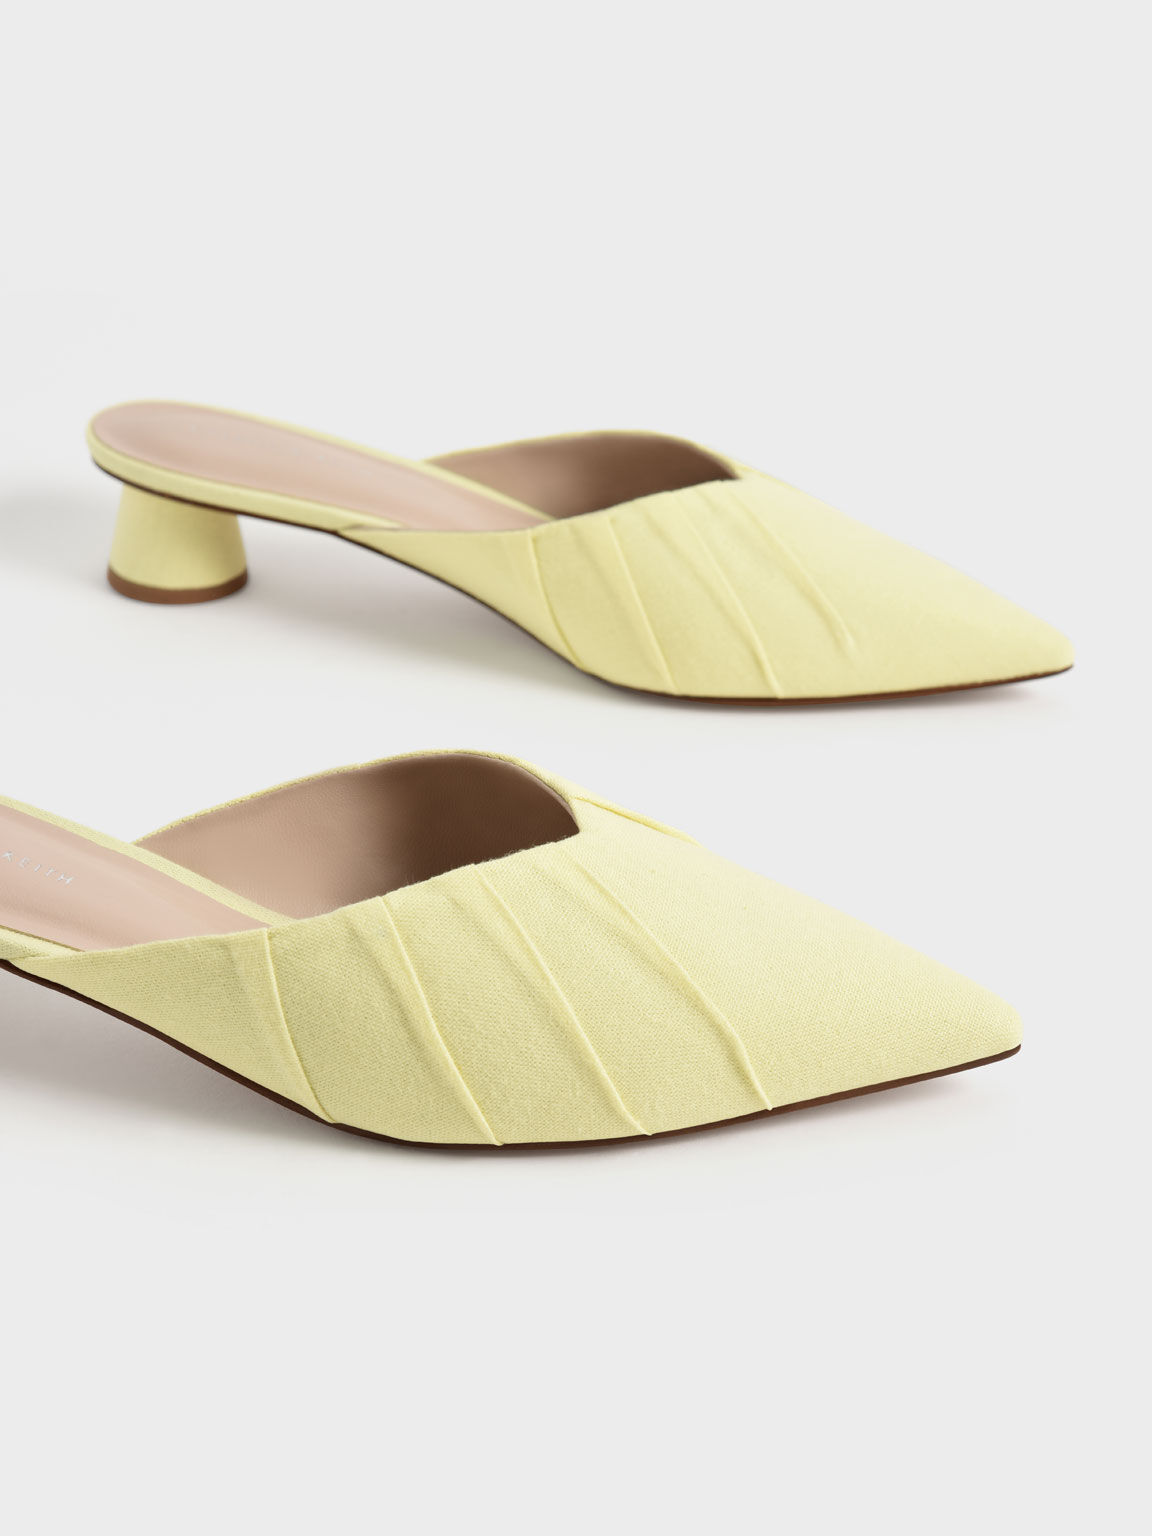 Linen Ruched Cylindrical Heel Mules, Yellow, hi-res